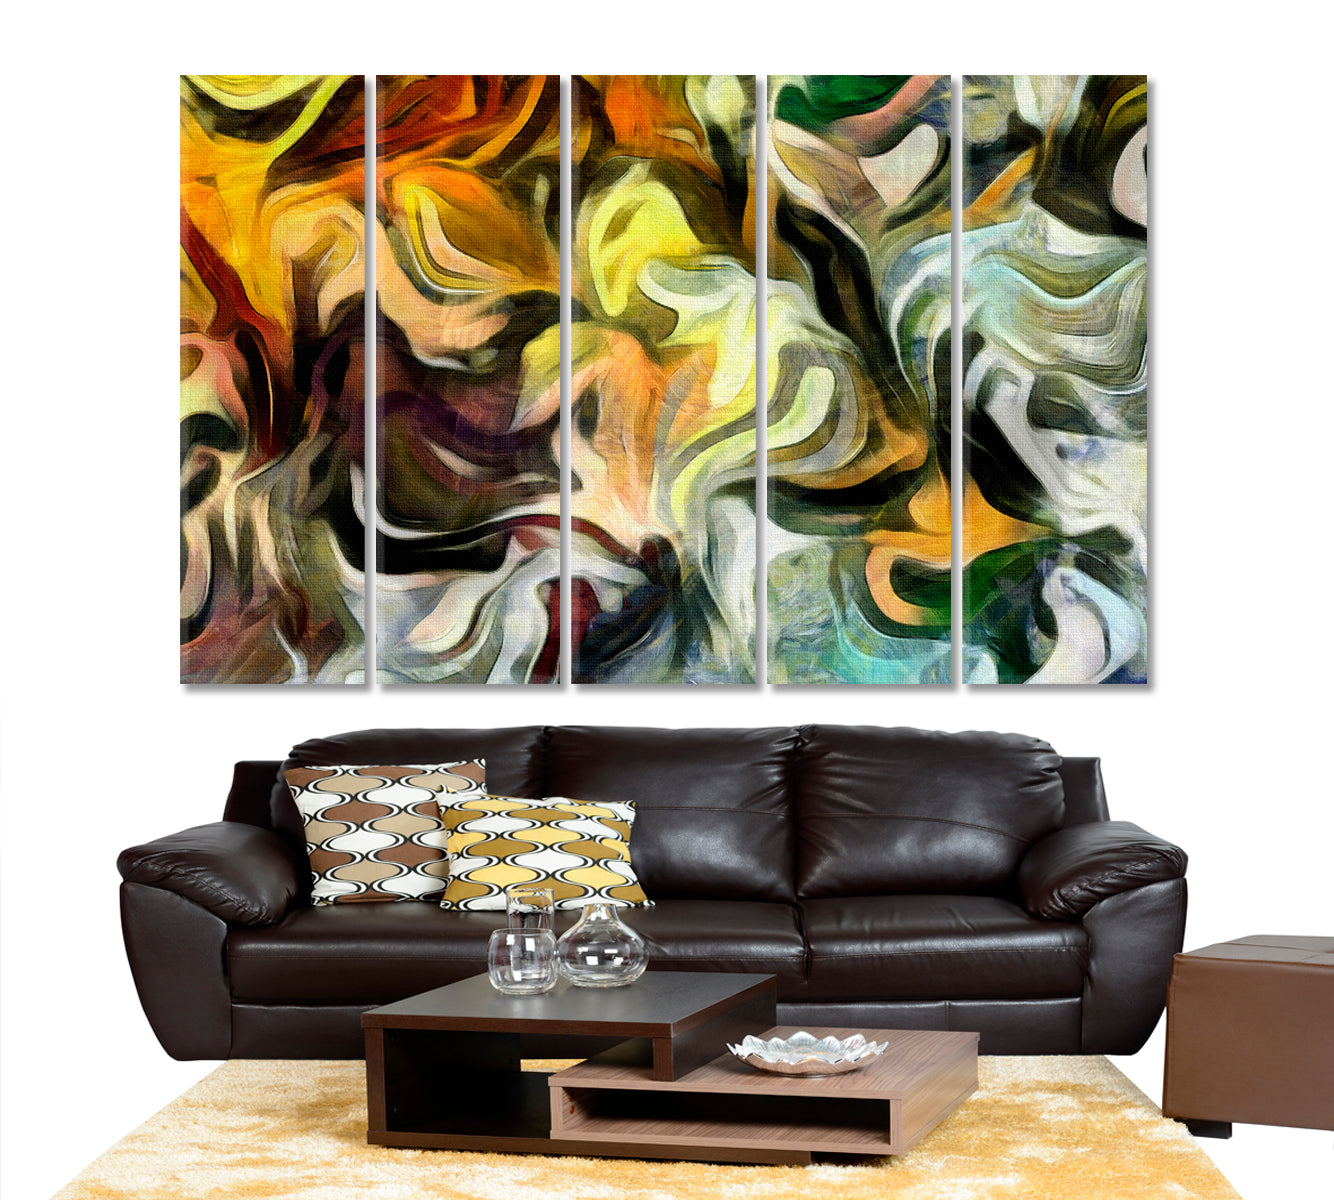 ART & WHIMSY  Fluid Lines and Color Movement Abstract Art Print Artesty 5 panels 36" x 24" 